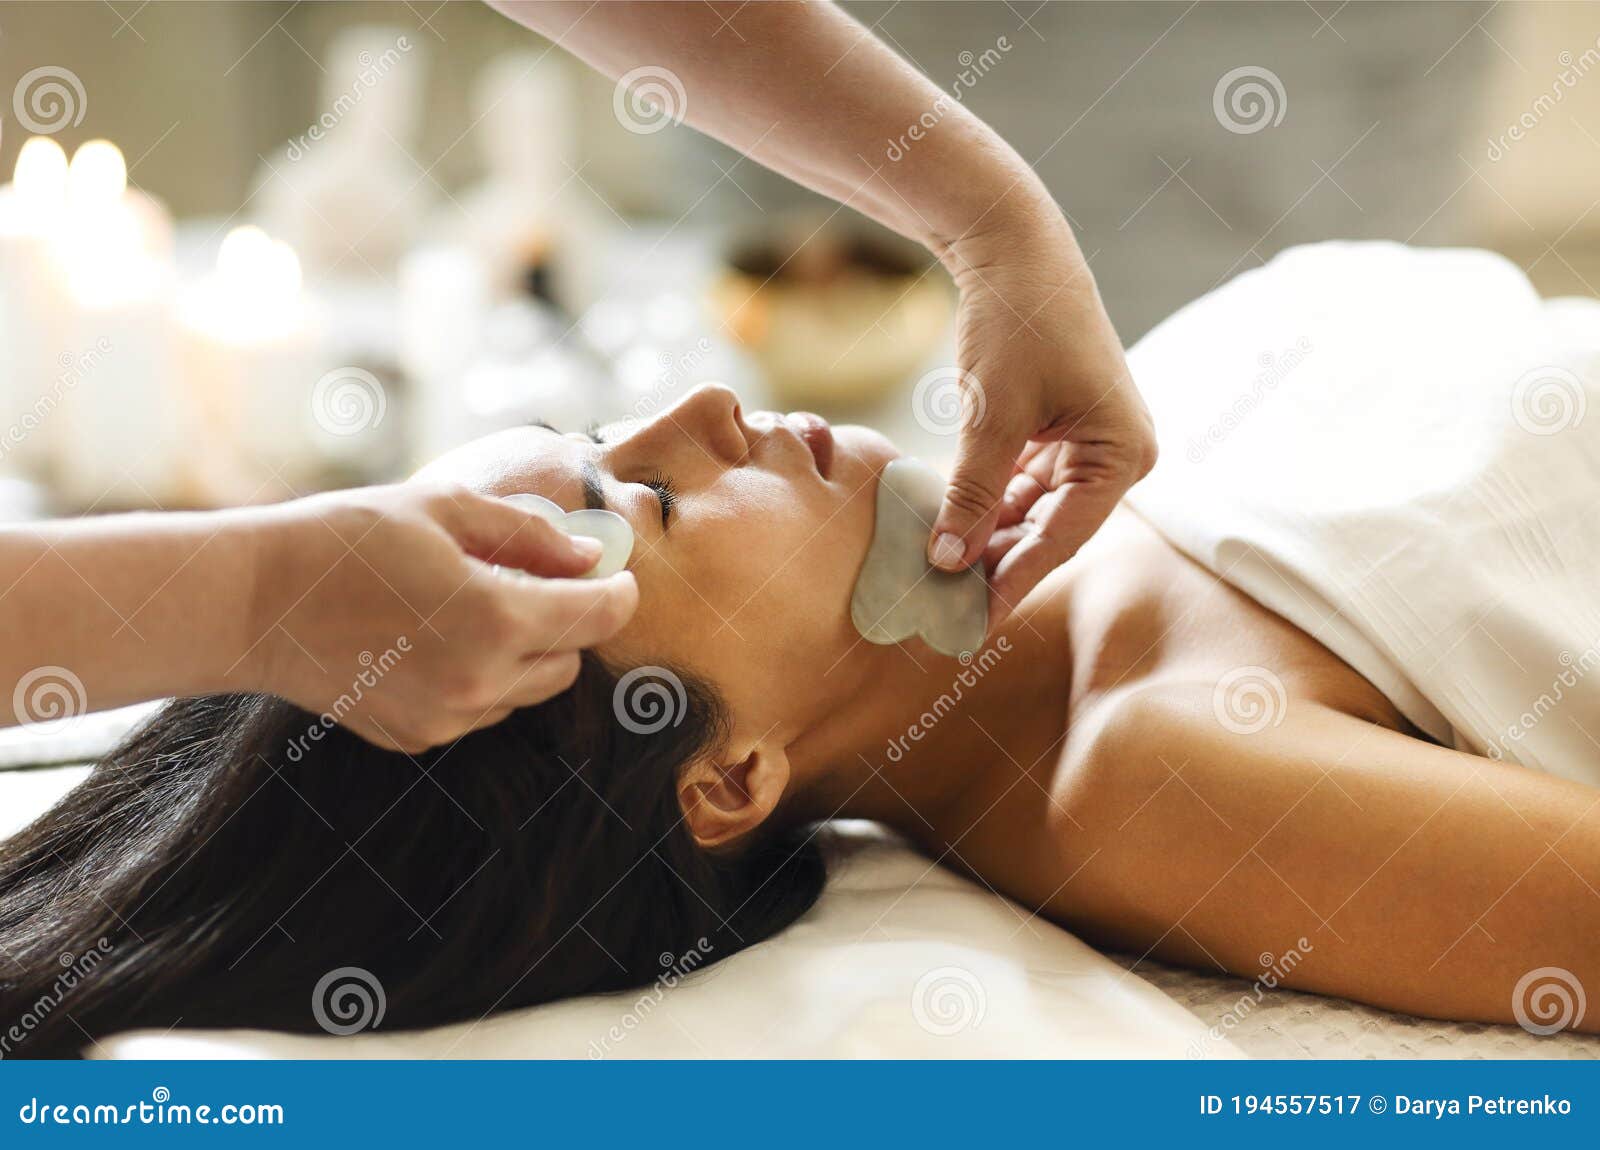 face massage or beauty treatment in spa salon